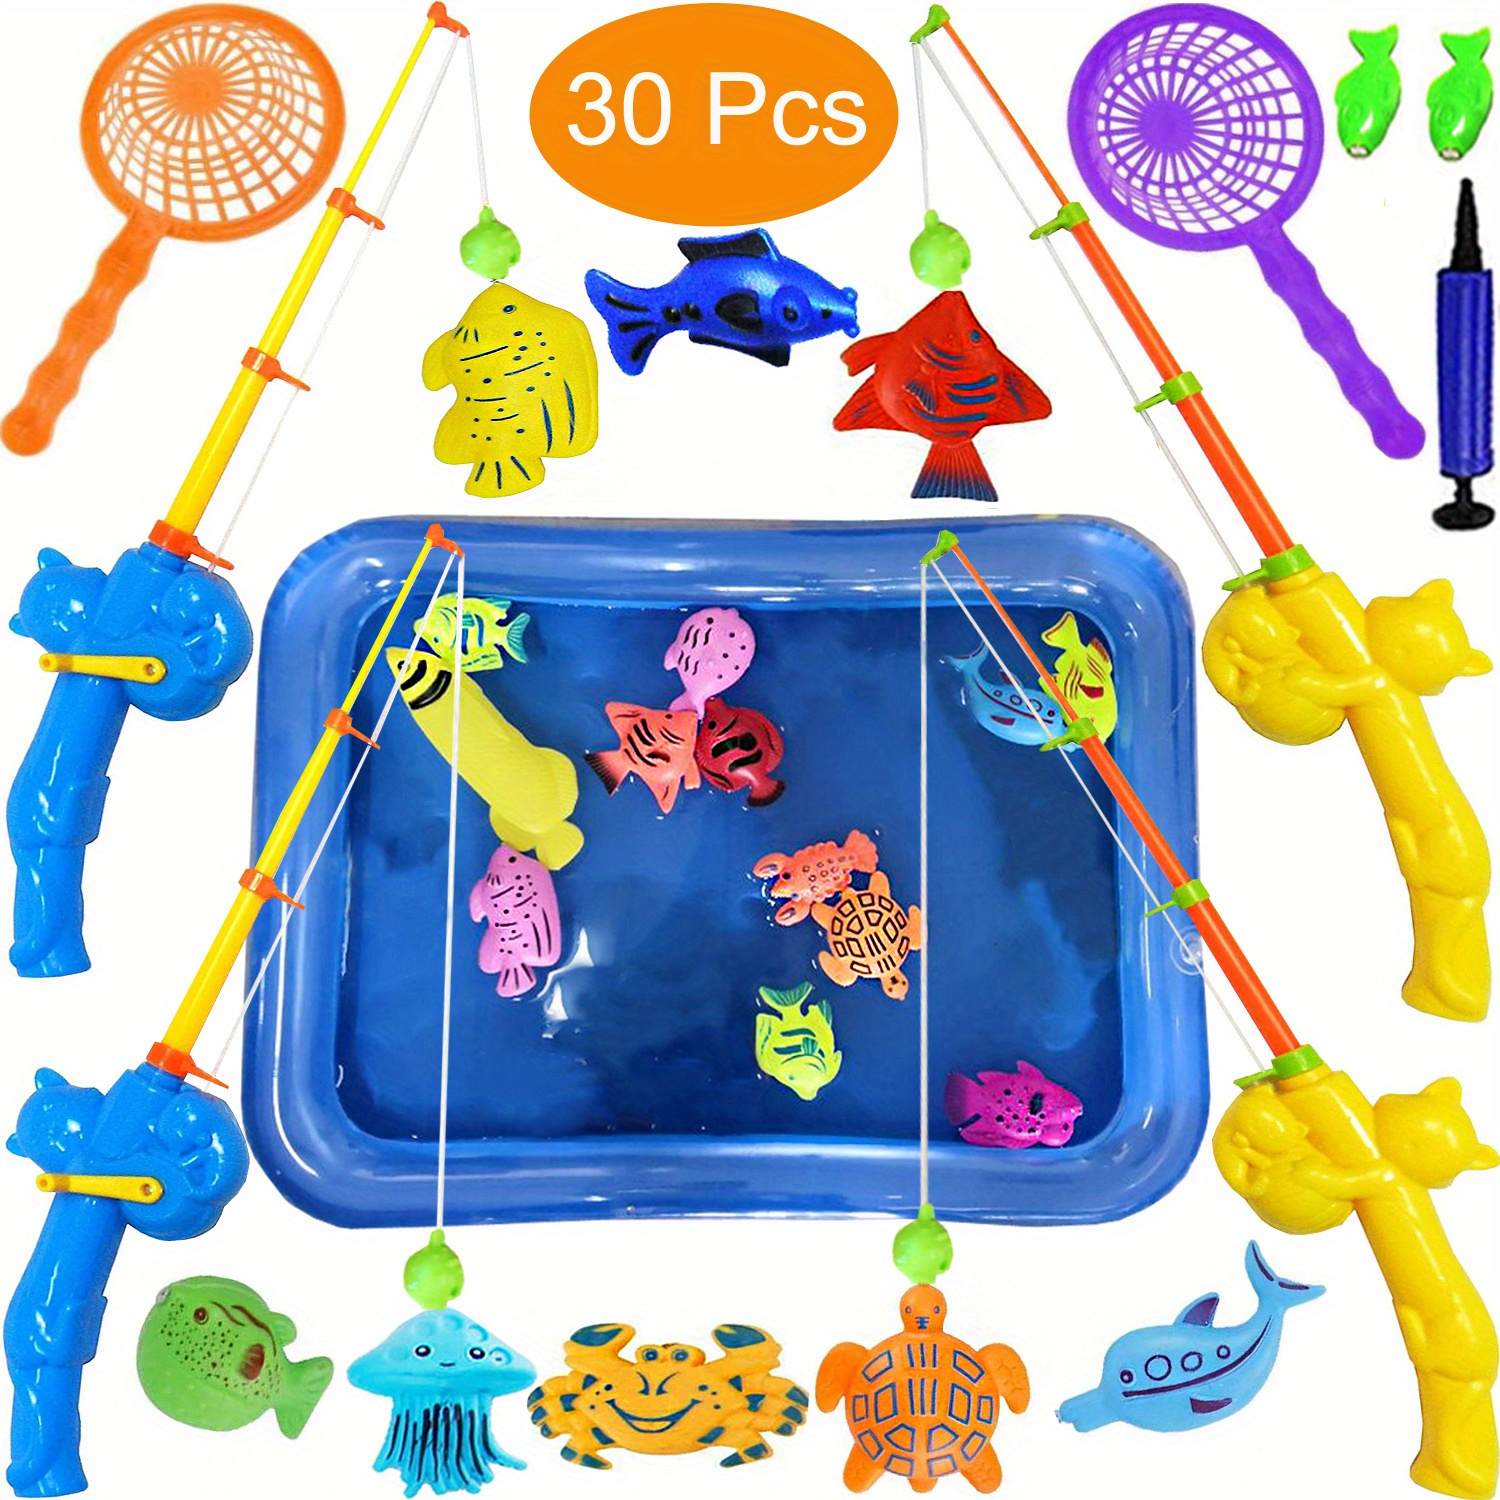 Magnetic Fishing Pool Toys Game For Kids, Fishing Game, Water Table Bathtub  Kiddie Party Toy With Pole Rod Net Plastic Floating Fish Pool Toddler Colo